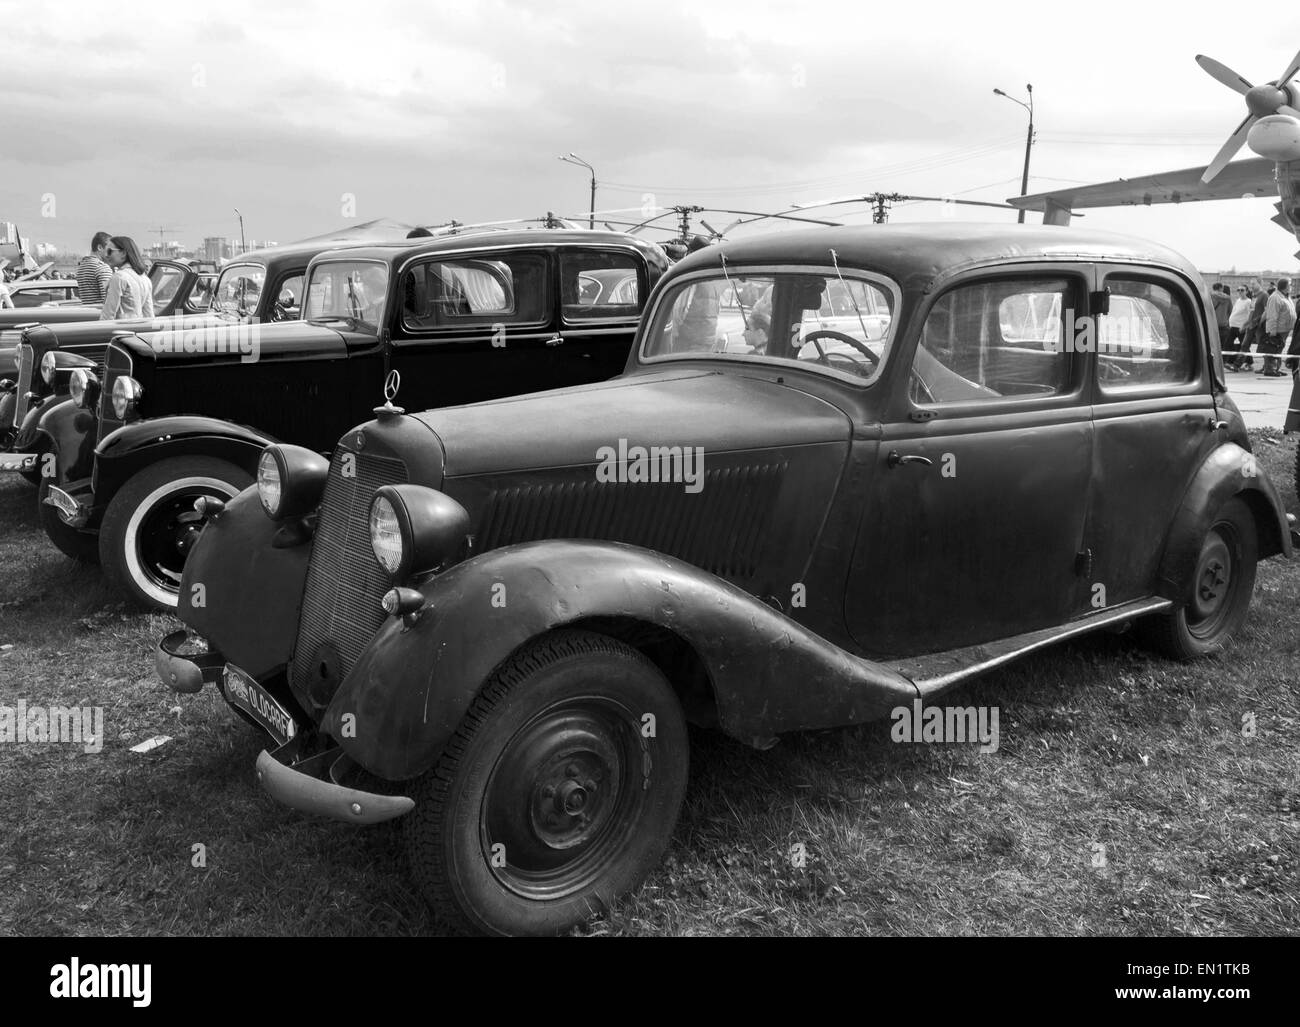 April 25, 2015 - Mercedes, 1937 -- The Retro OldCarFest is the biggest retro cars festival held in Kiev, and covers the State Aviation Museum grounds. More than 300 cars are involved into this project and more than 20 thousand visitors are expected to attend. © Igor Golovniov/ZUMA Wire/Alamy Live News Stock Photo